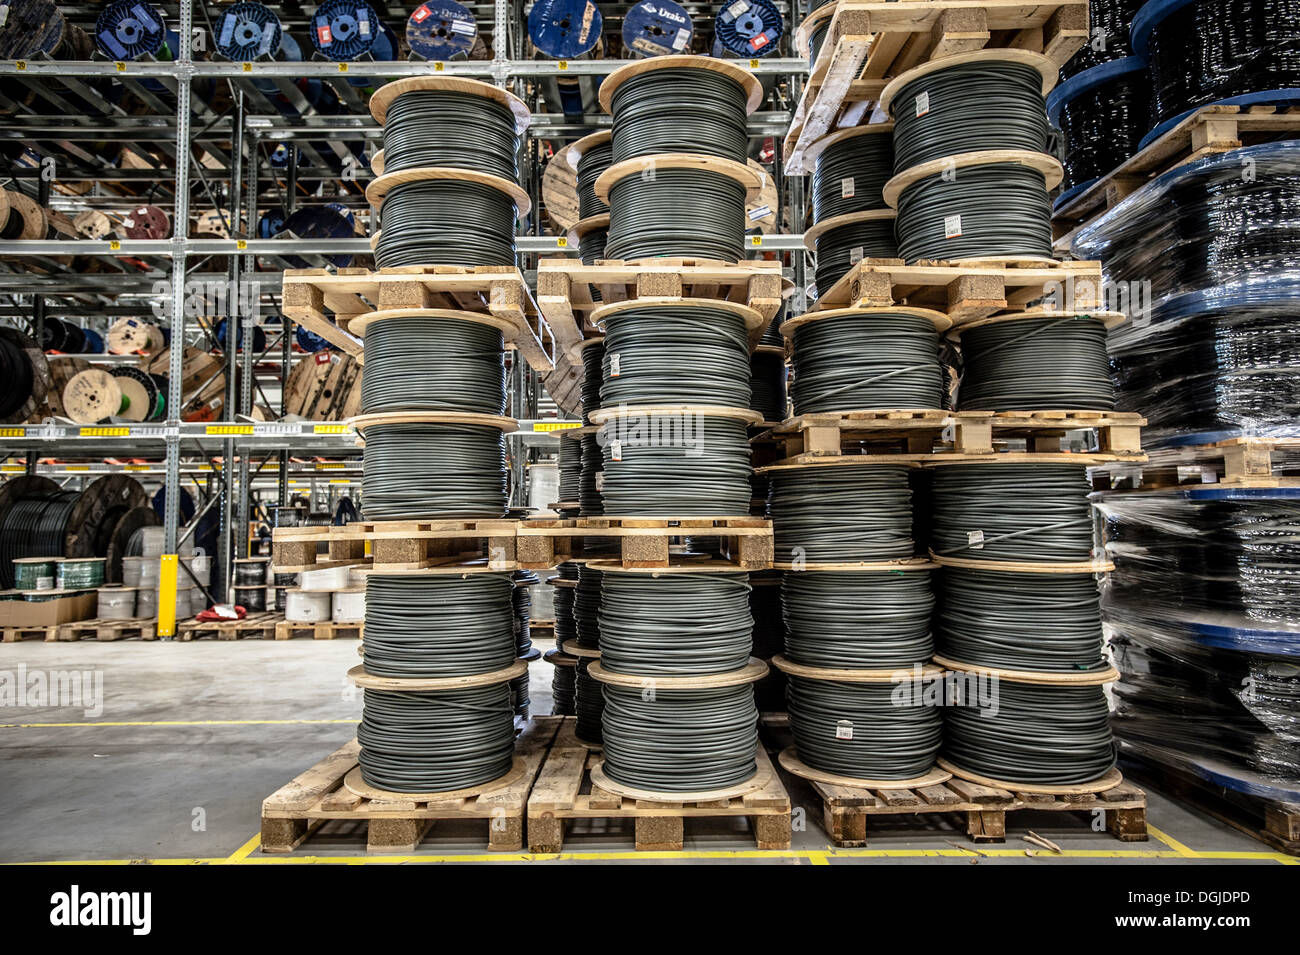 Cable drums stacked on pallets in warehouse Stock Photo